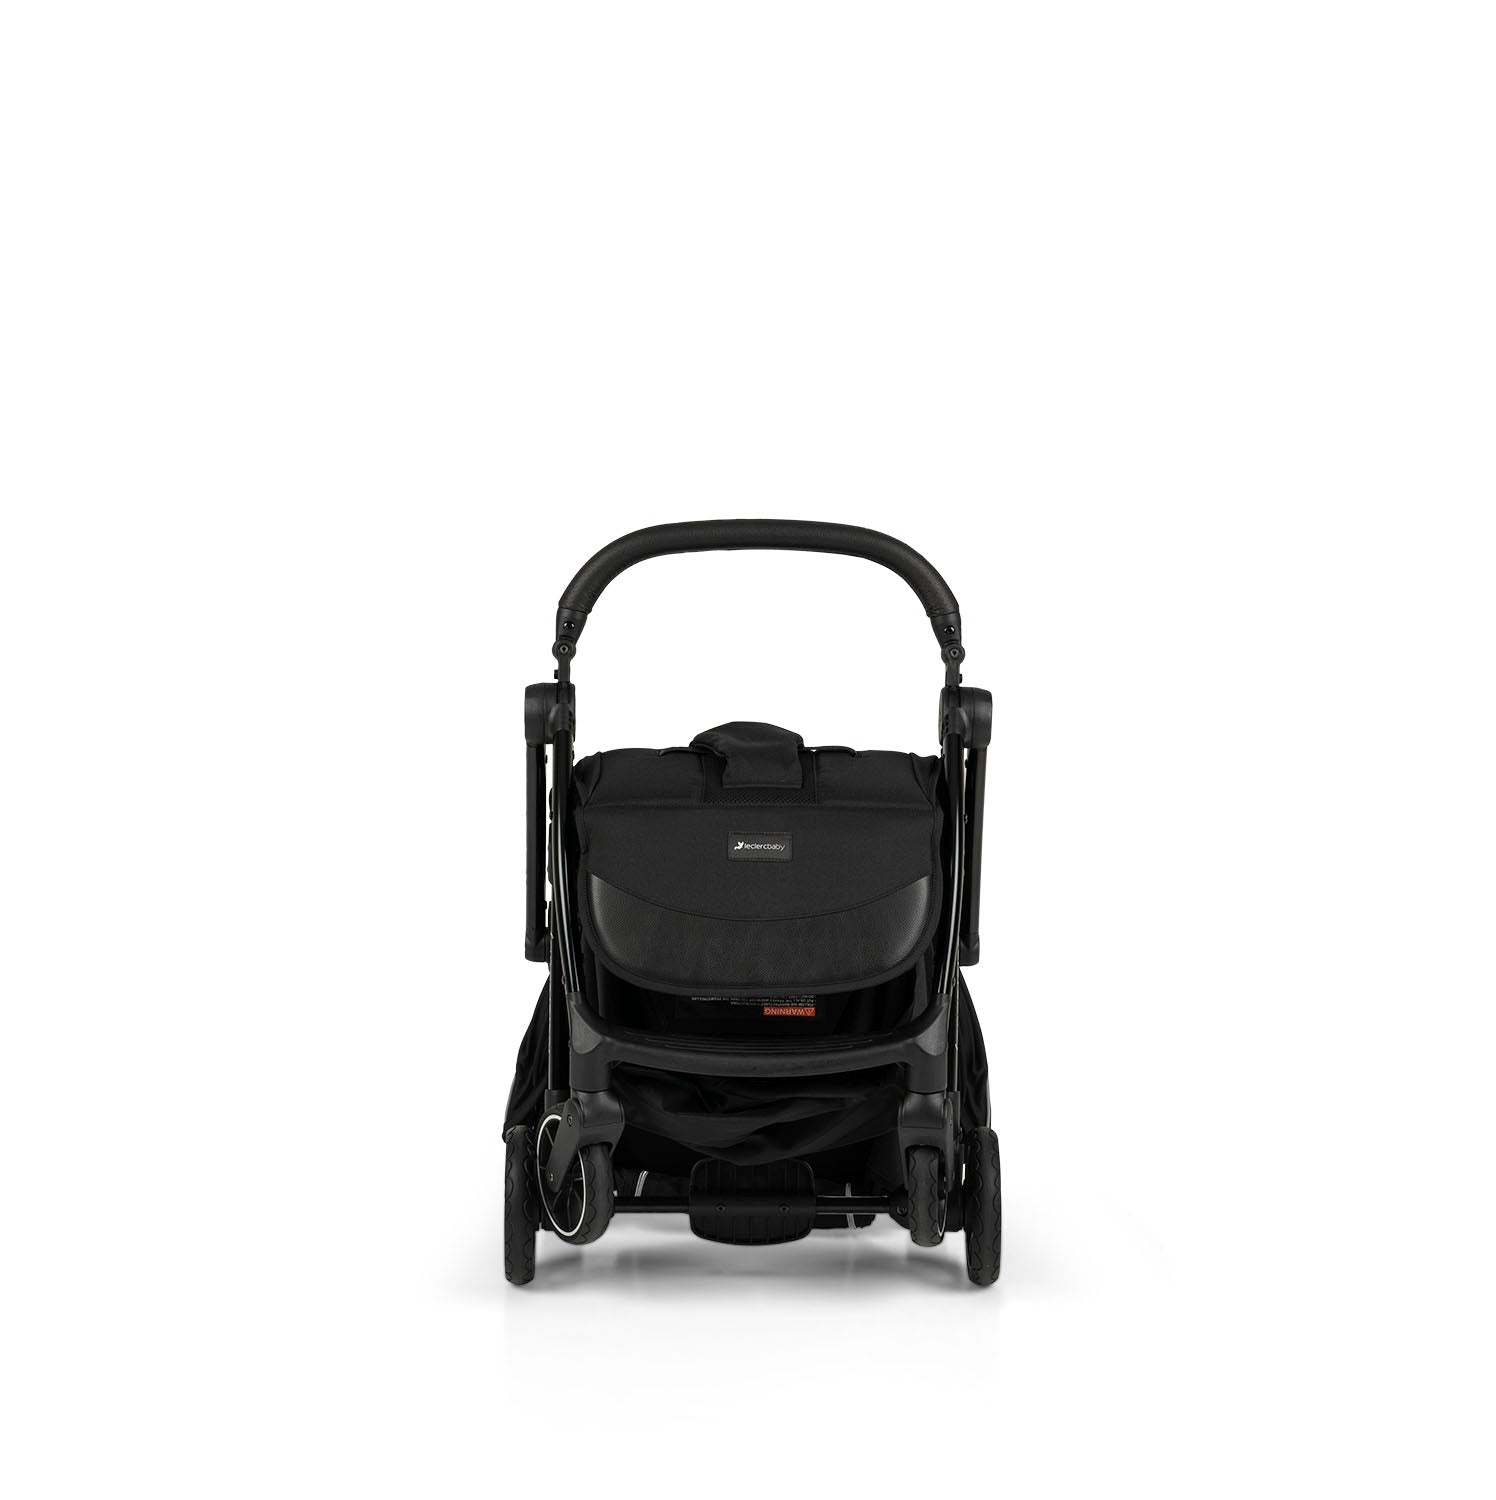 Influencer Air Twin Stroller Bundle : Piano Black Stroller + Piano Black Stroller